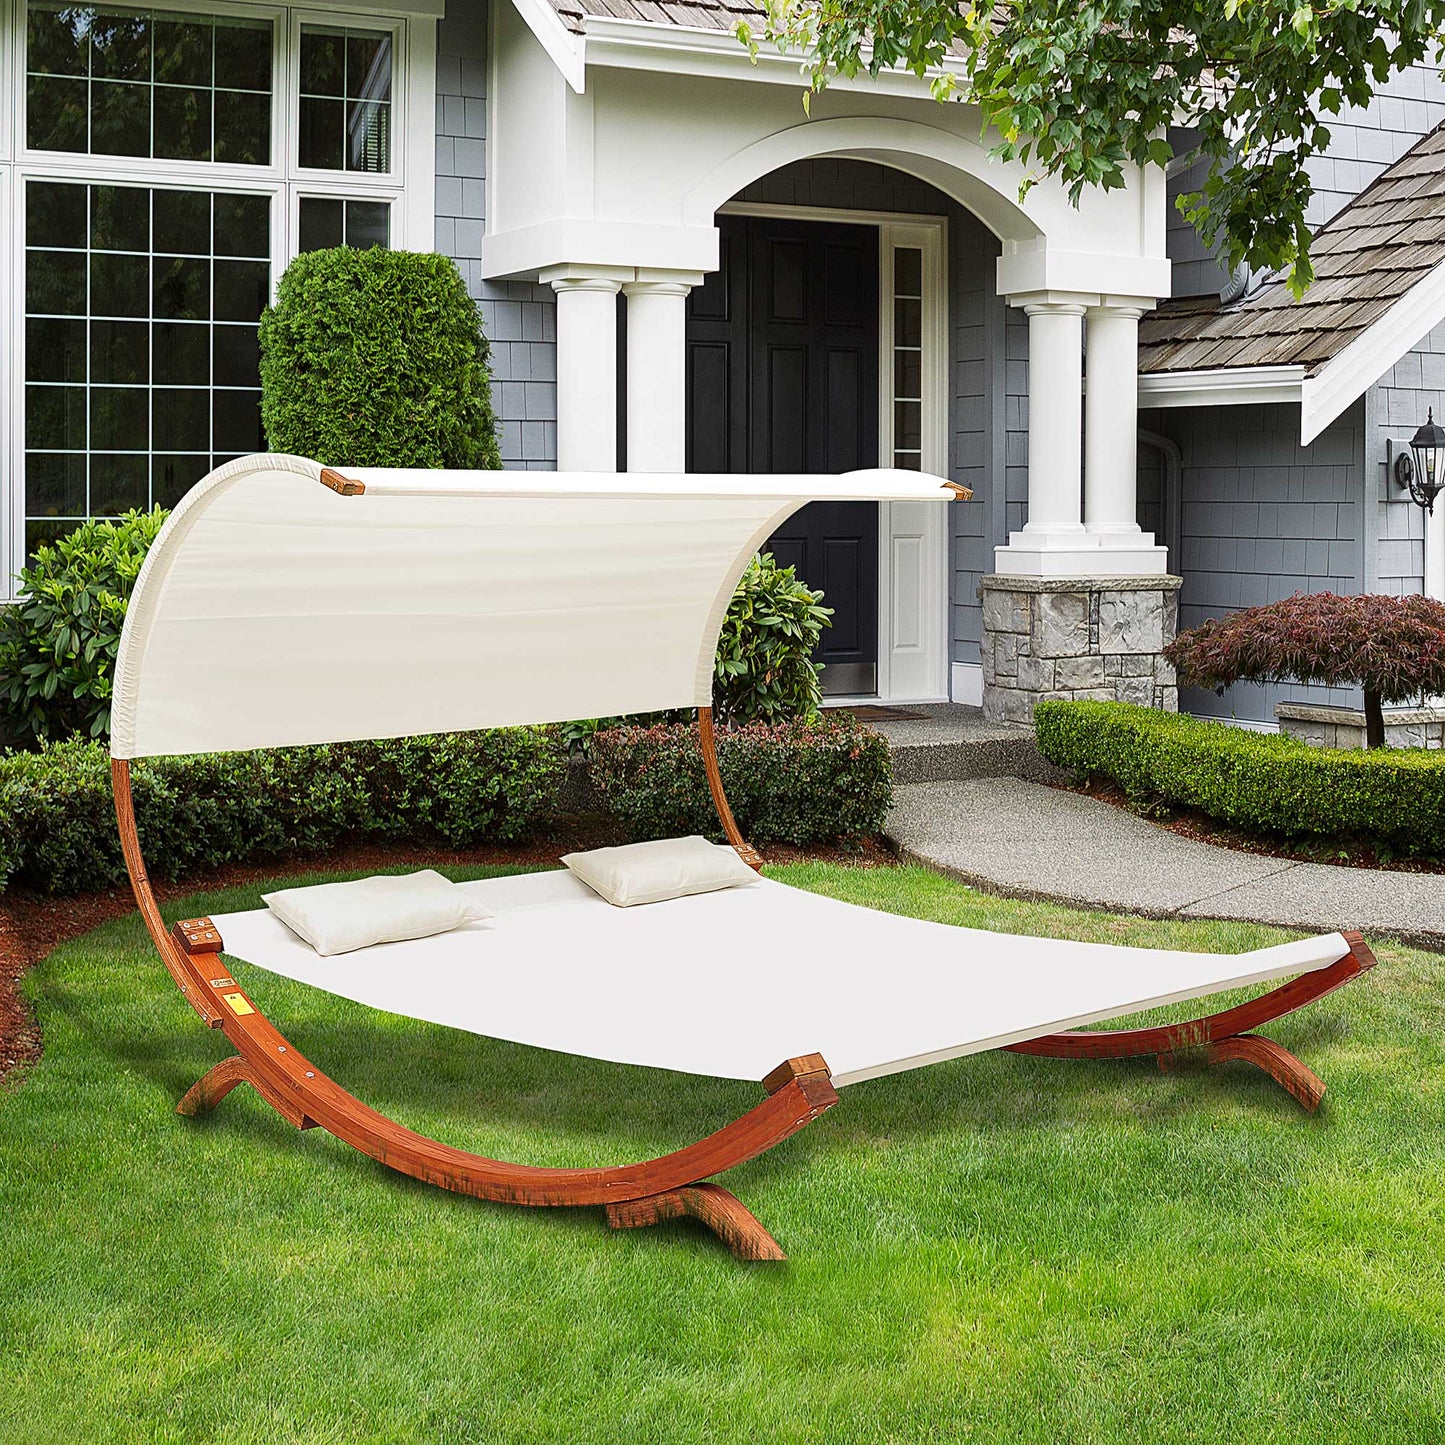 Outsunny Wooden Hammock Lounger Chaise Double Sun Bed Canopy Shelter Outdoor Wood White Garden-Cream